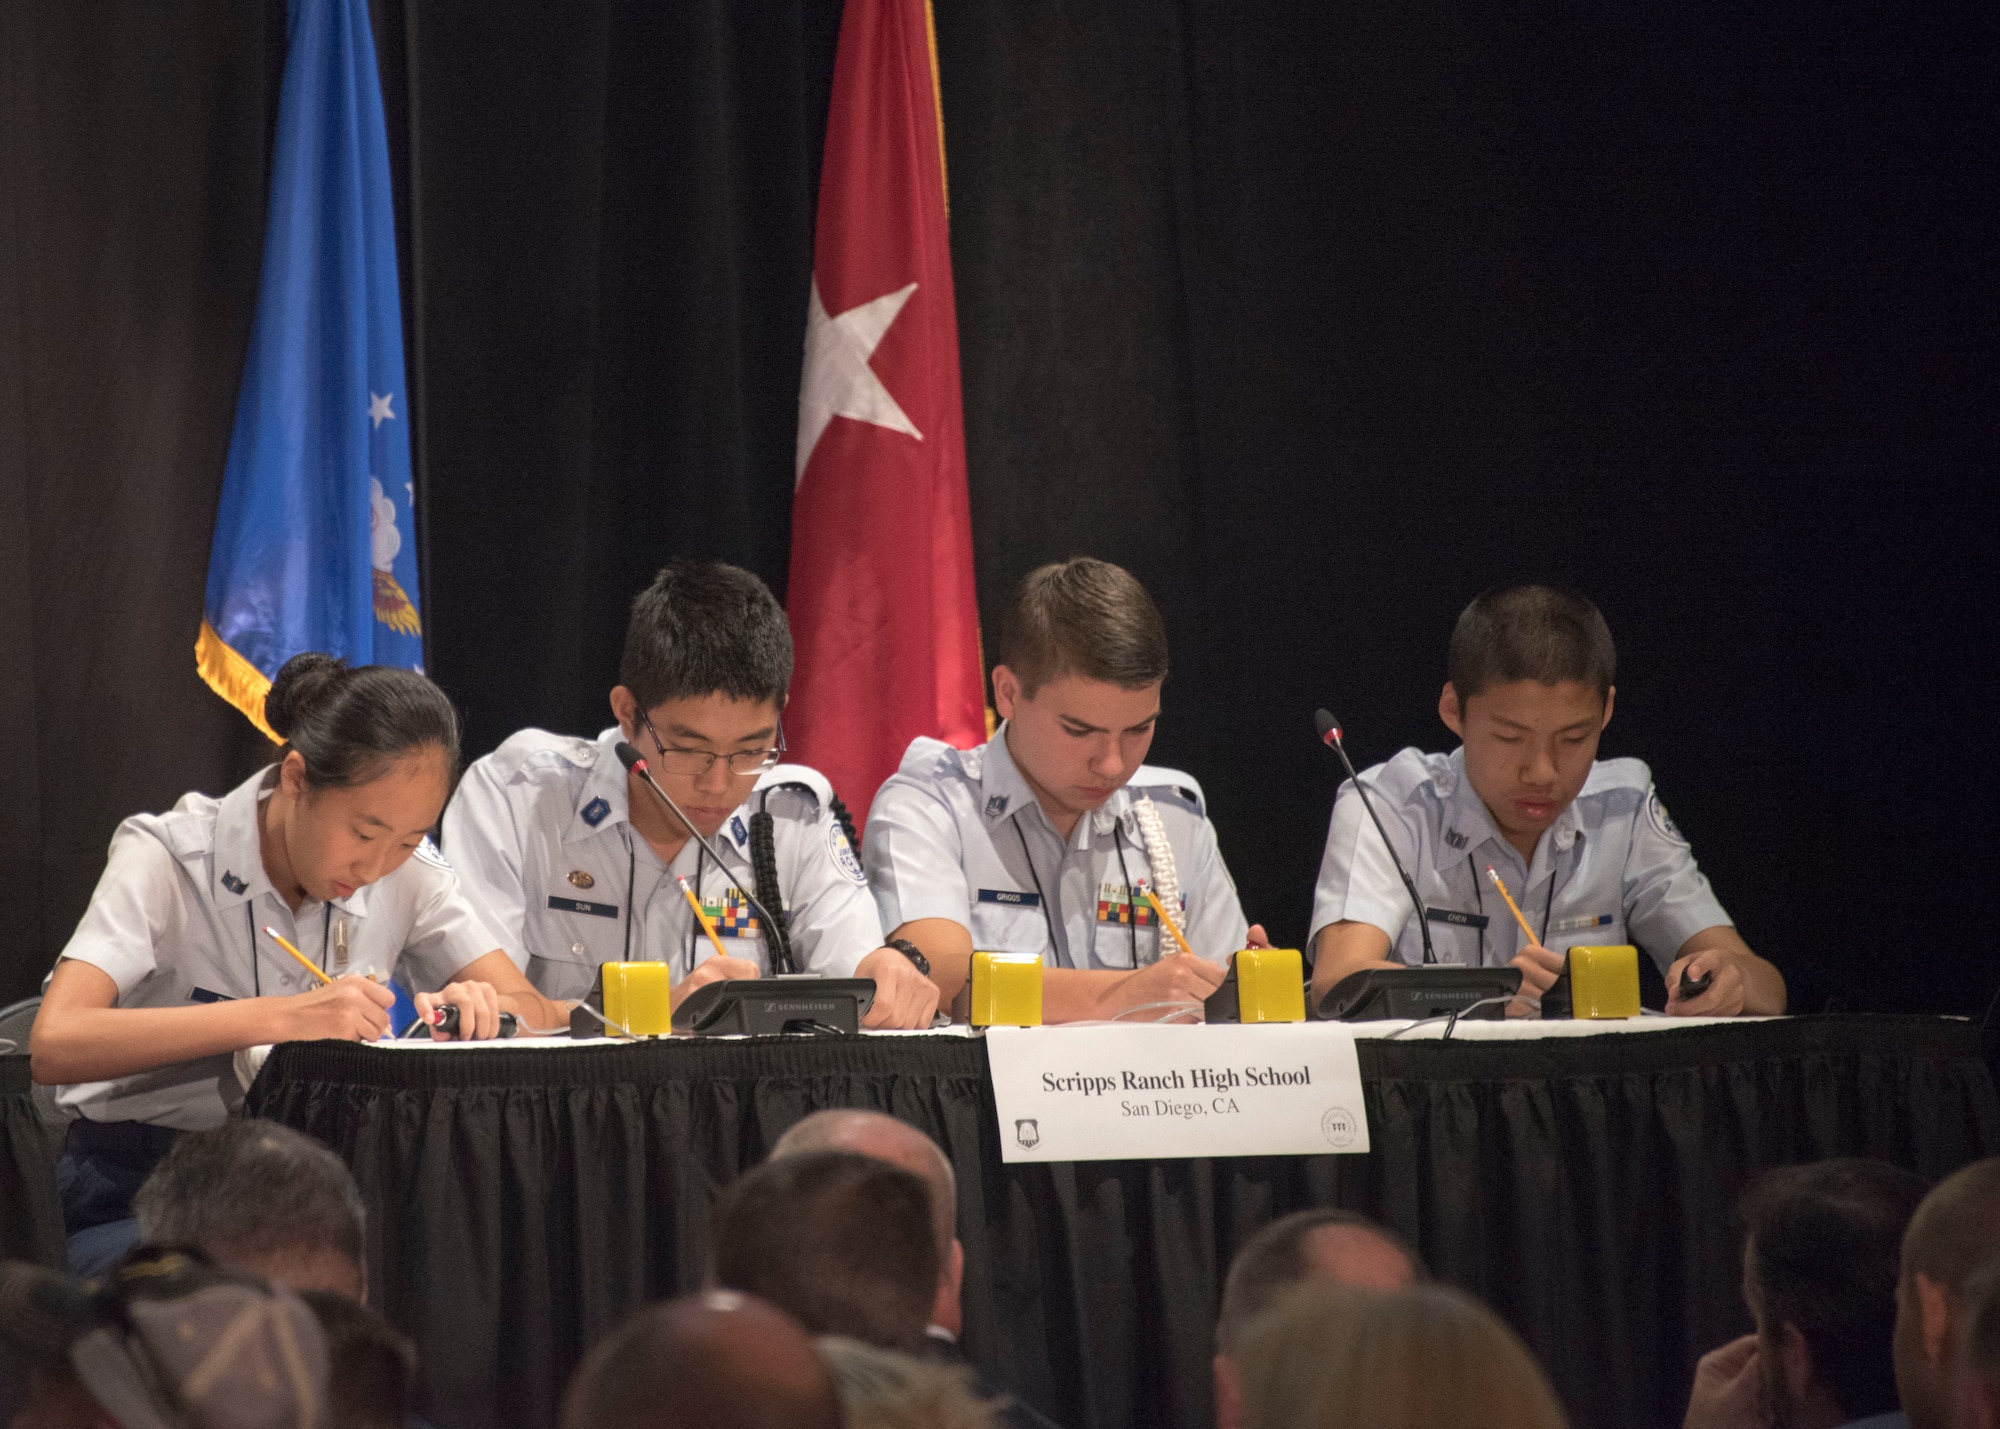 Air Force Junior Reserve Officer Training Corps team from Scripps Ranch High School, San Diego Calif., use pencil and paper to answer a math question during the finals of the  a question in which requited pencil and paper during the 8th Annual Joint Service Academic Bowl, in Washington, D.C., June 23, 2019. The team competed against more than 430 Air Force JROTC teams to make it to the finals after months of testing and competing. (Air Force Photo by Staff Sgt. Jared Duhon)